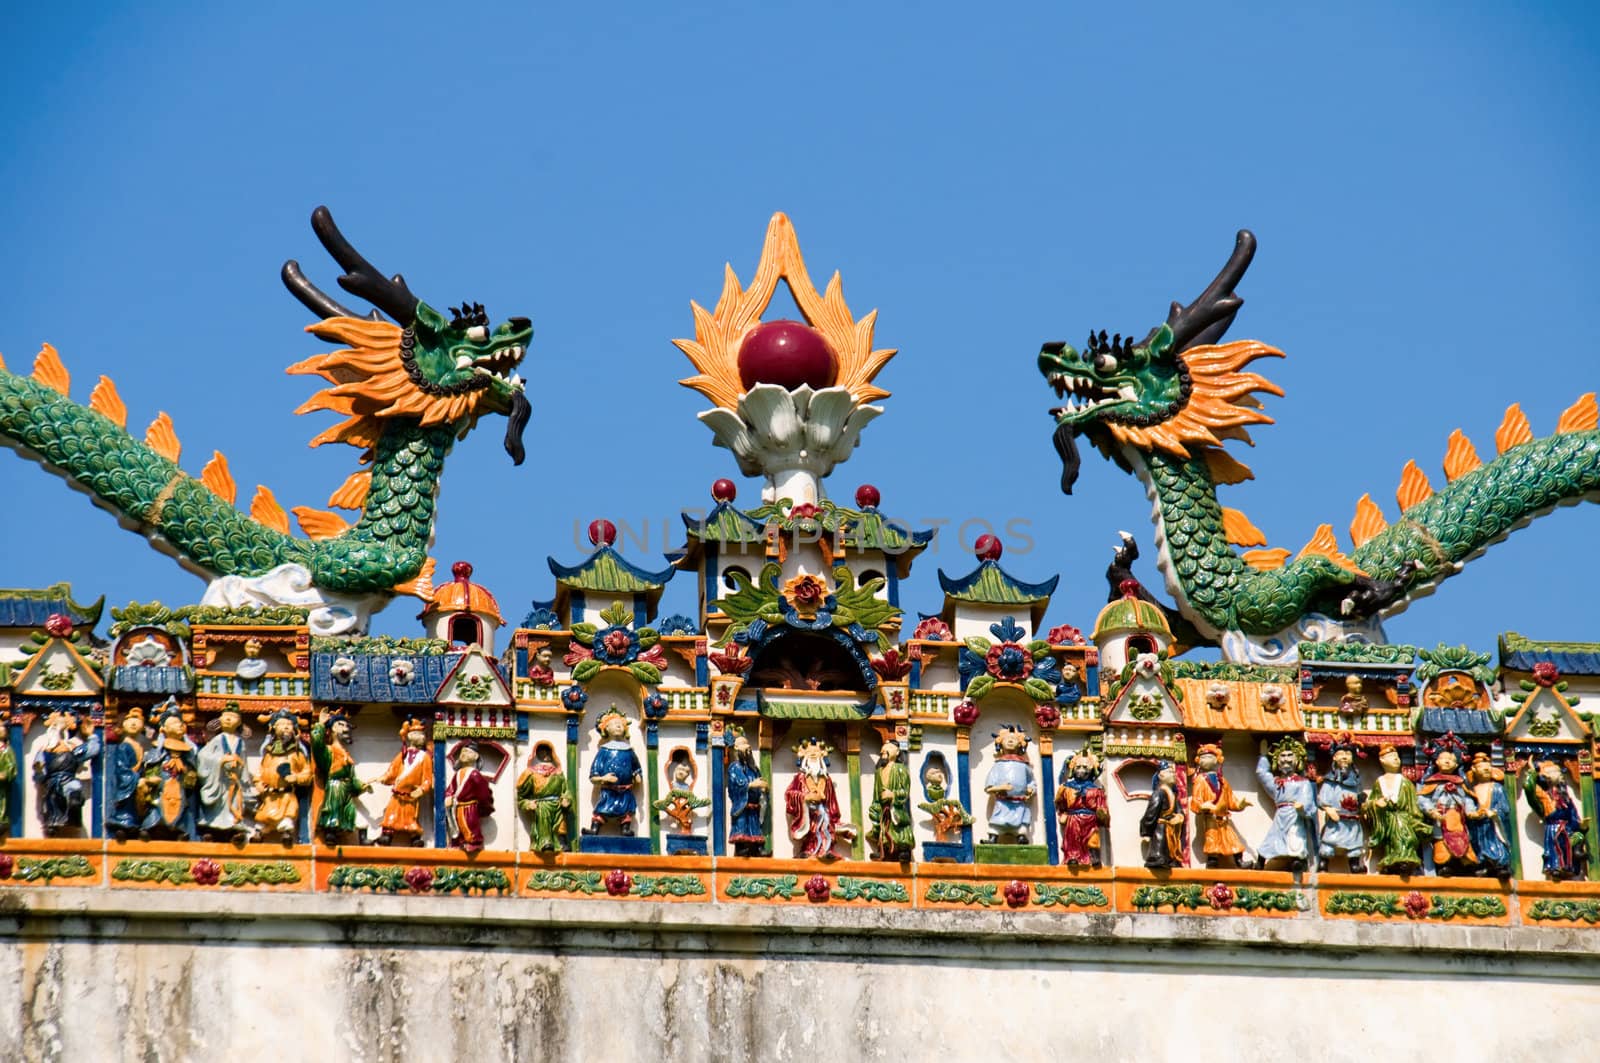 The carving of figurines on roof of Chinese temple